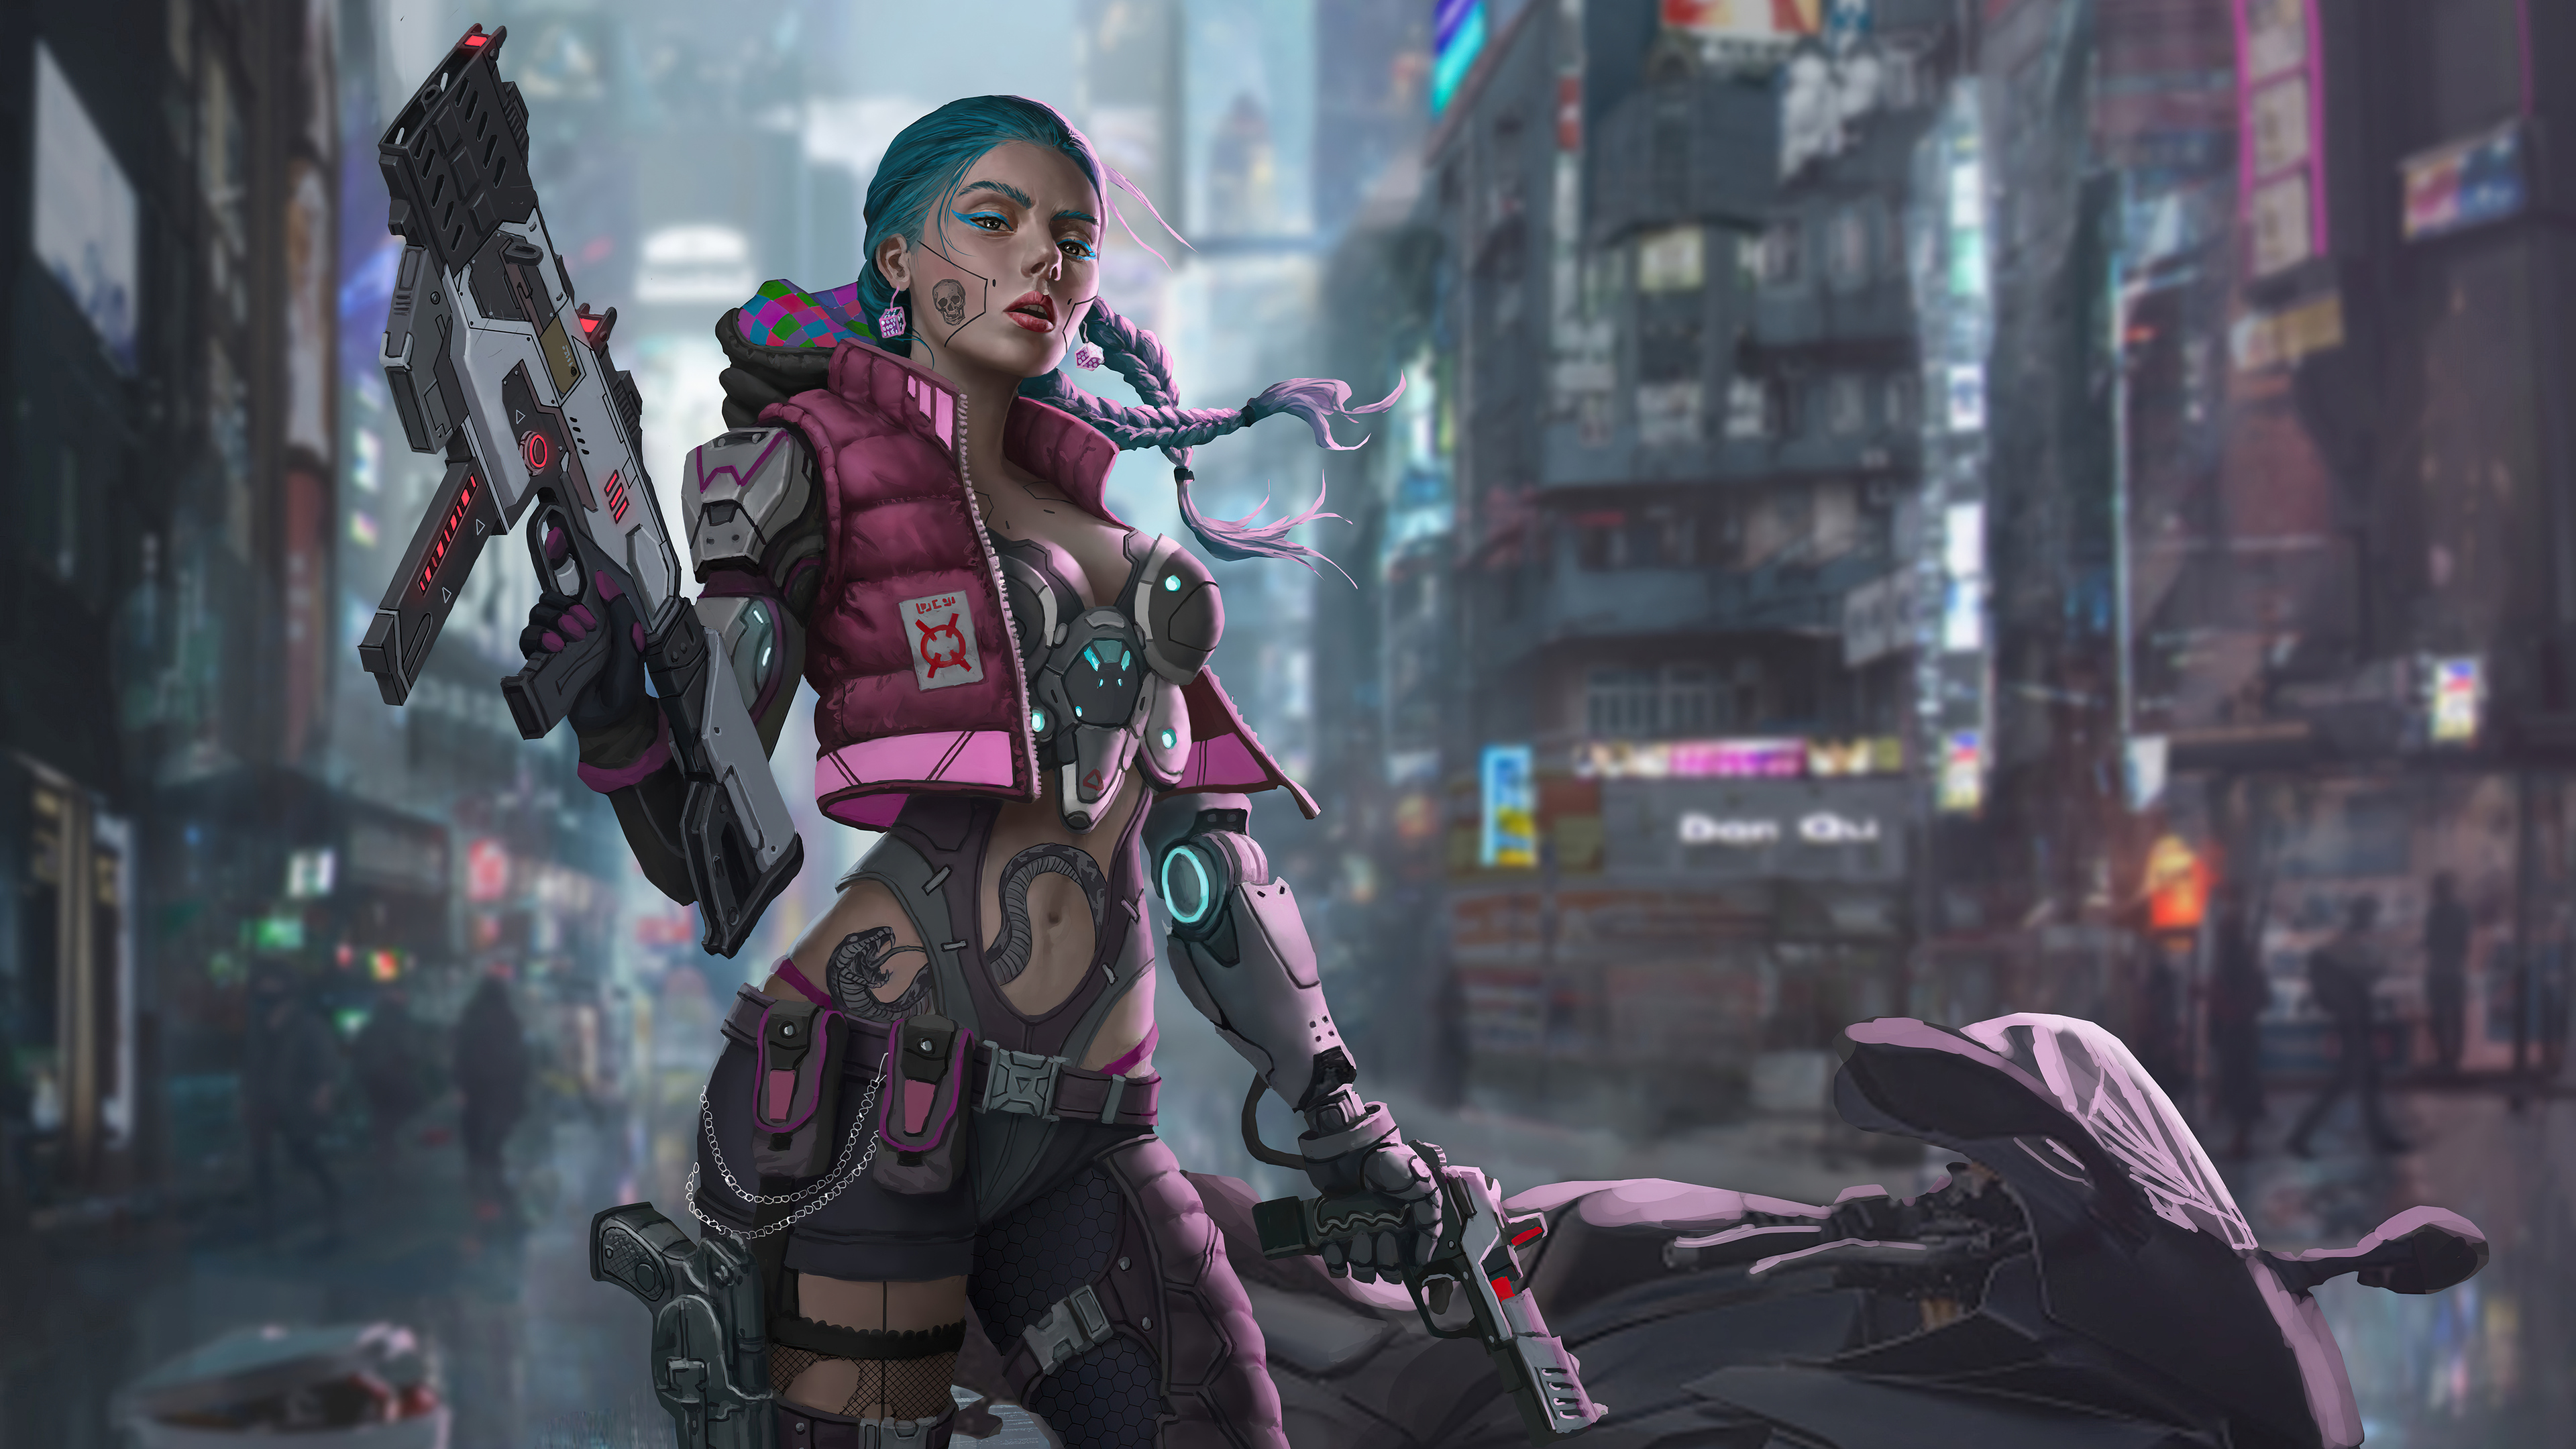 Free photo The girl with the gun from the cyberpunk game